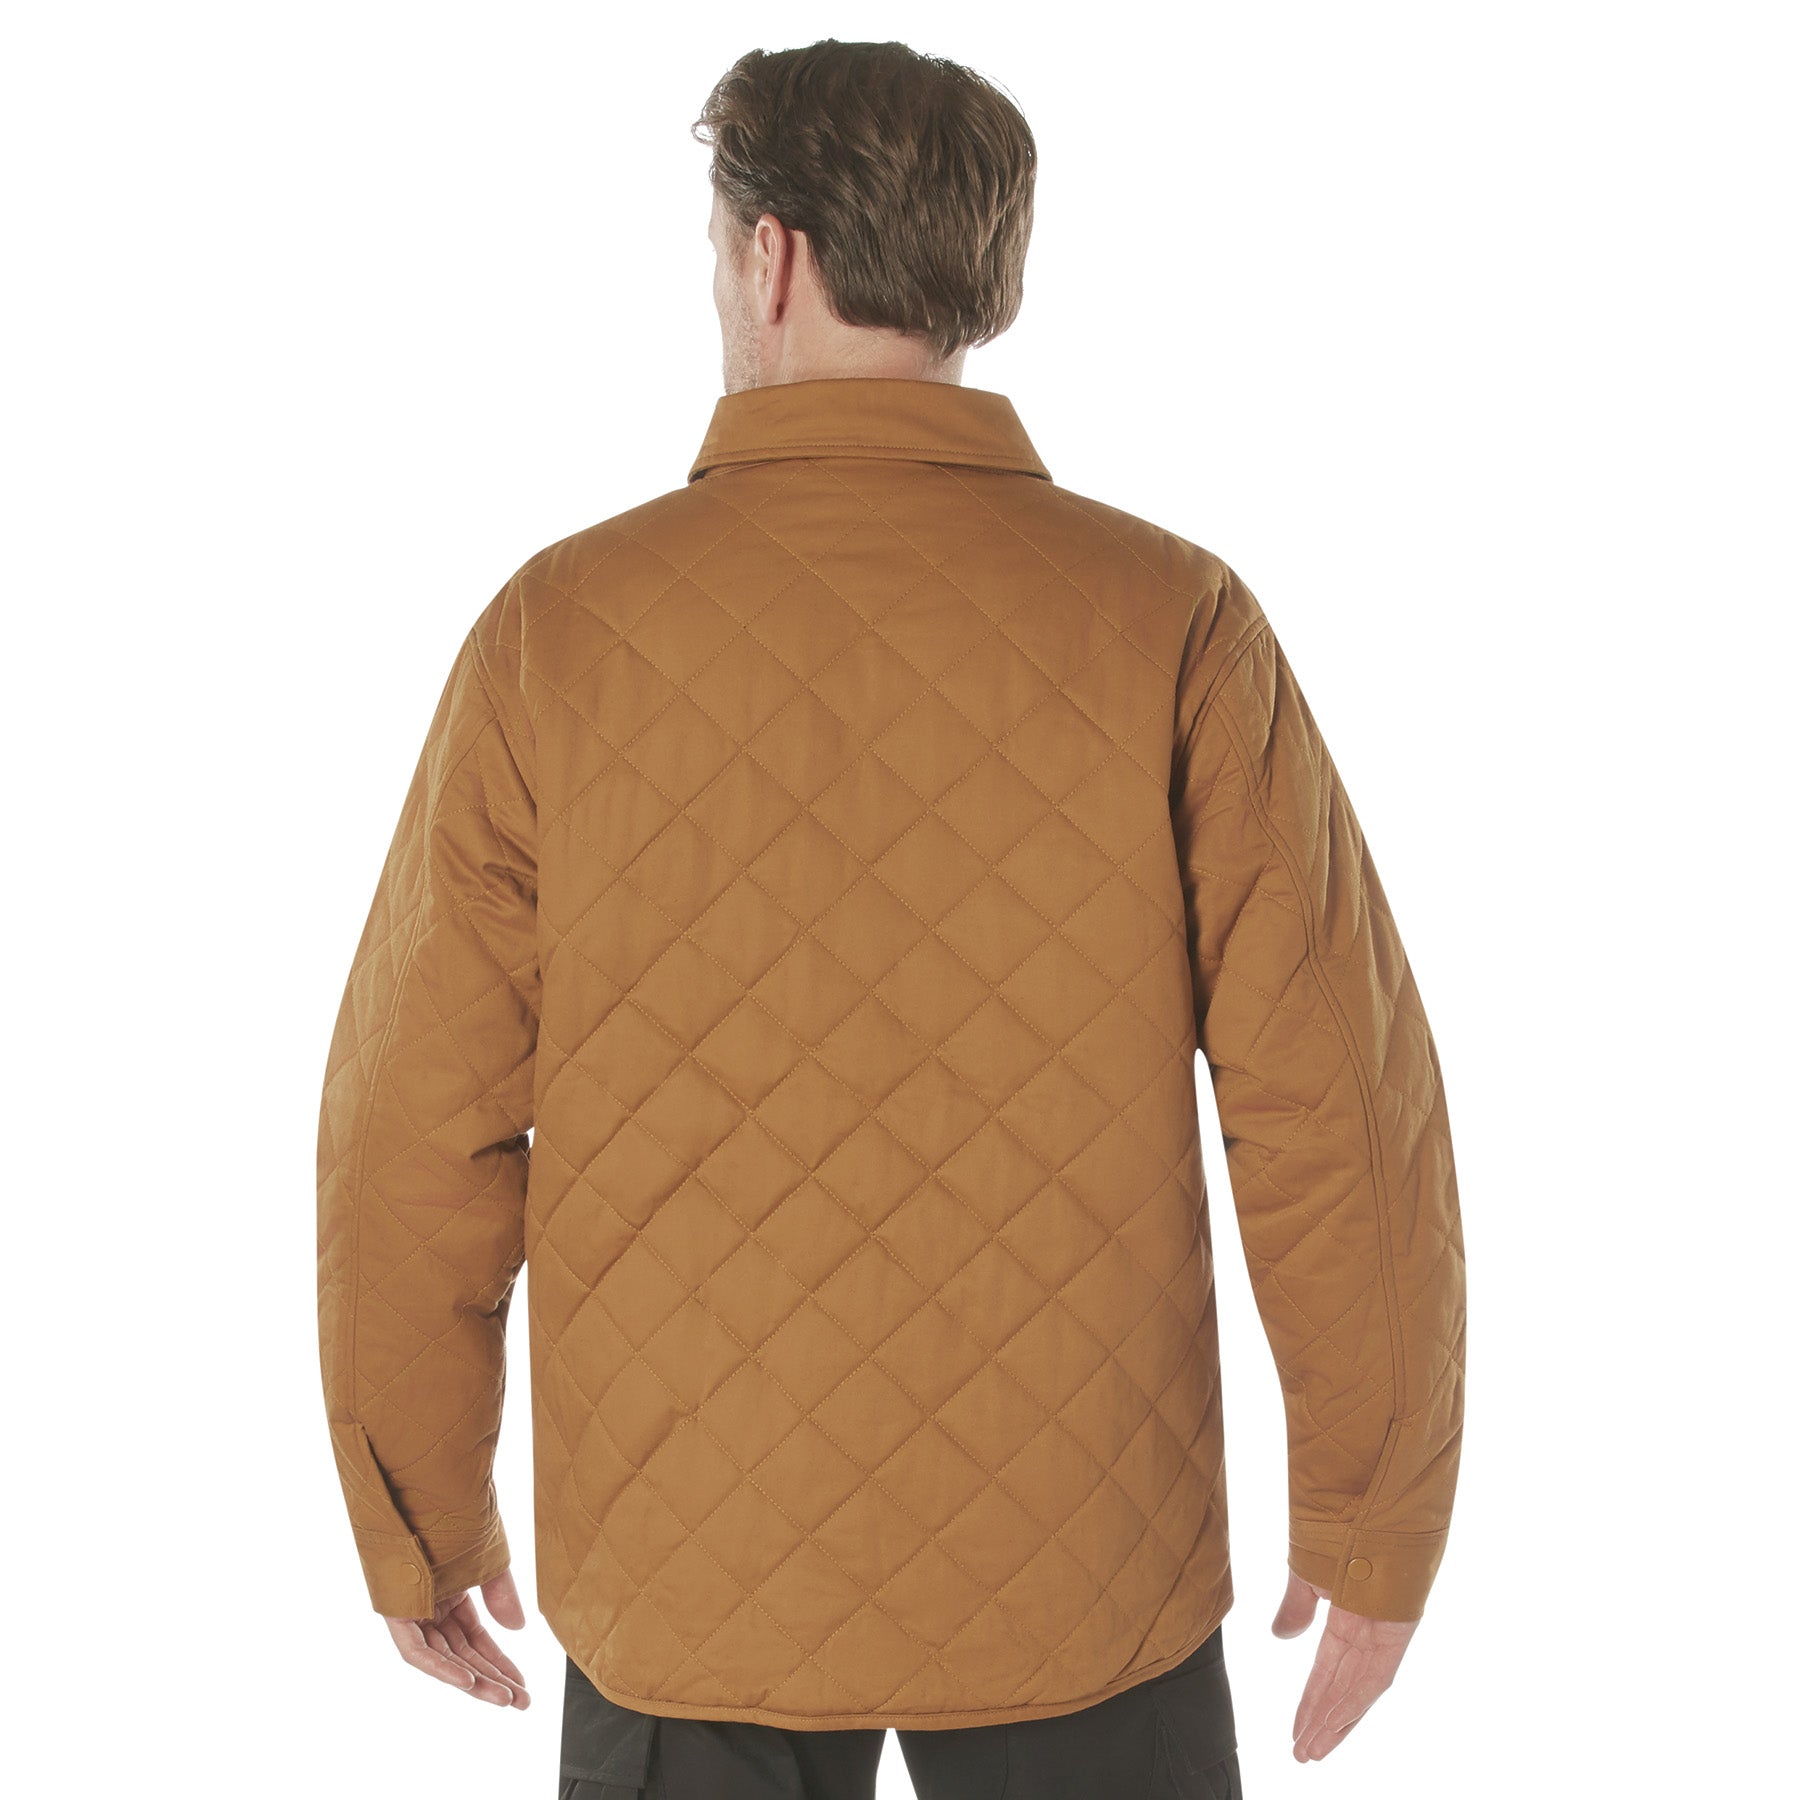 Cockpit USA Diamond Quilted Bomber Jacket